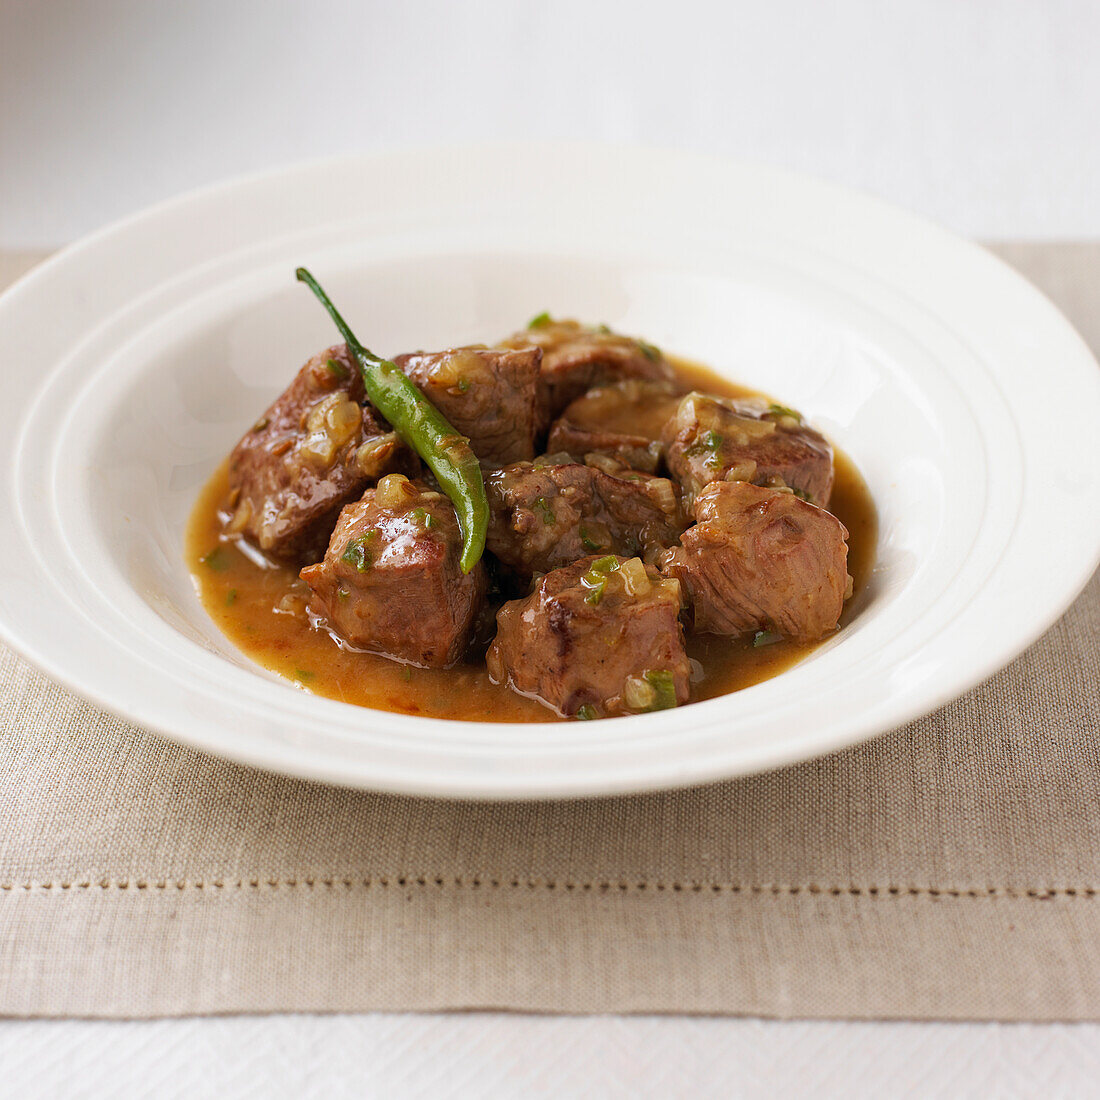 Pan-fried lamb with green chillies